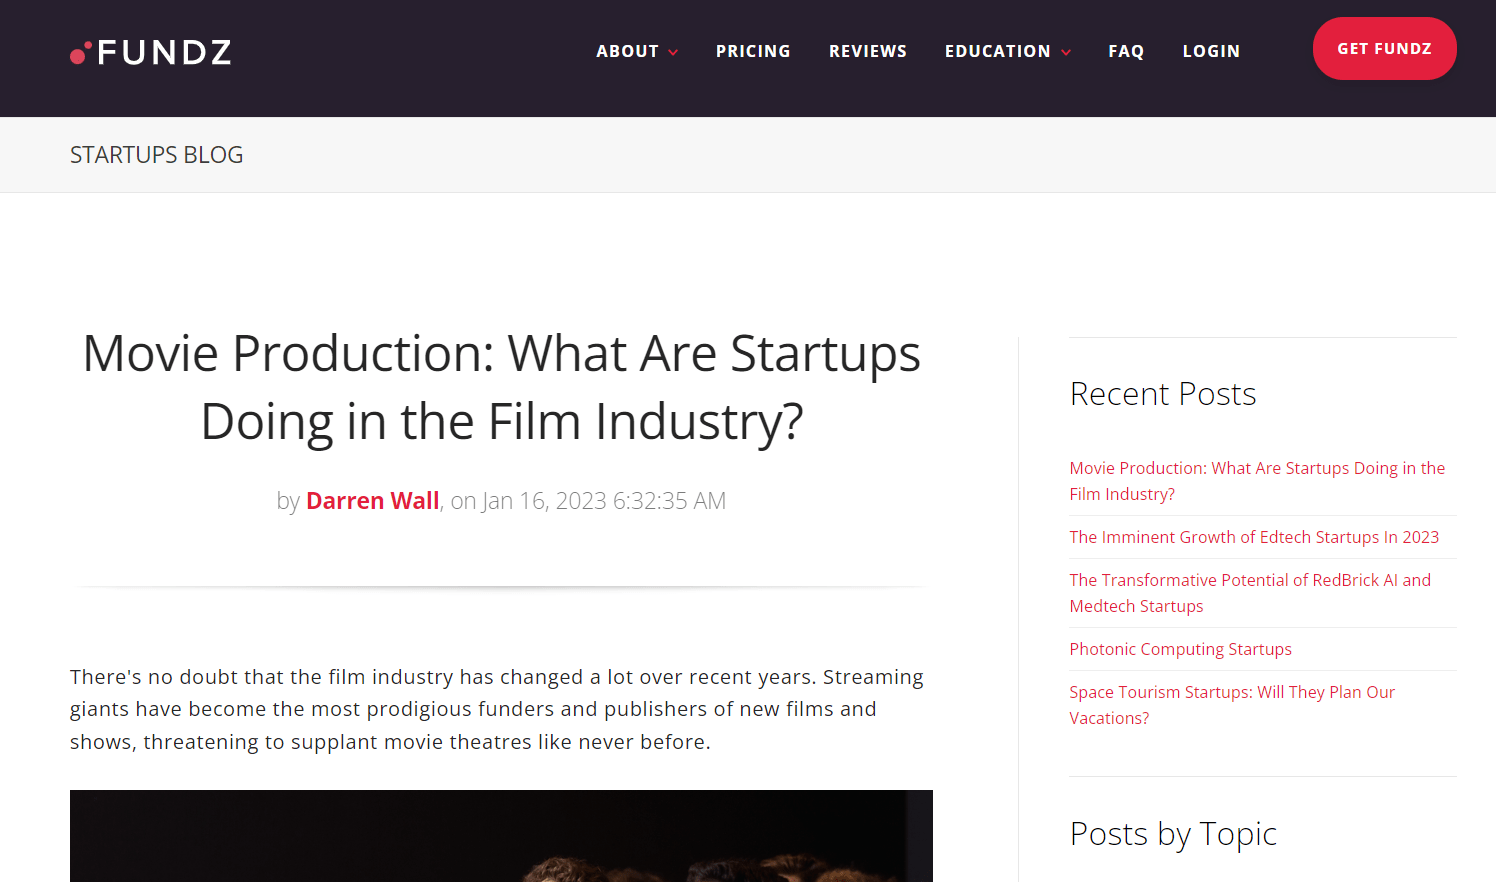 A snapshot of Fundz content aimed at startups in the movie industry.